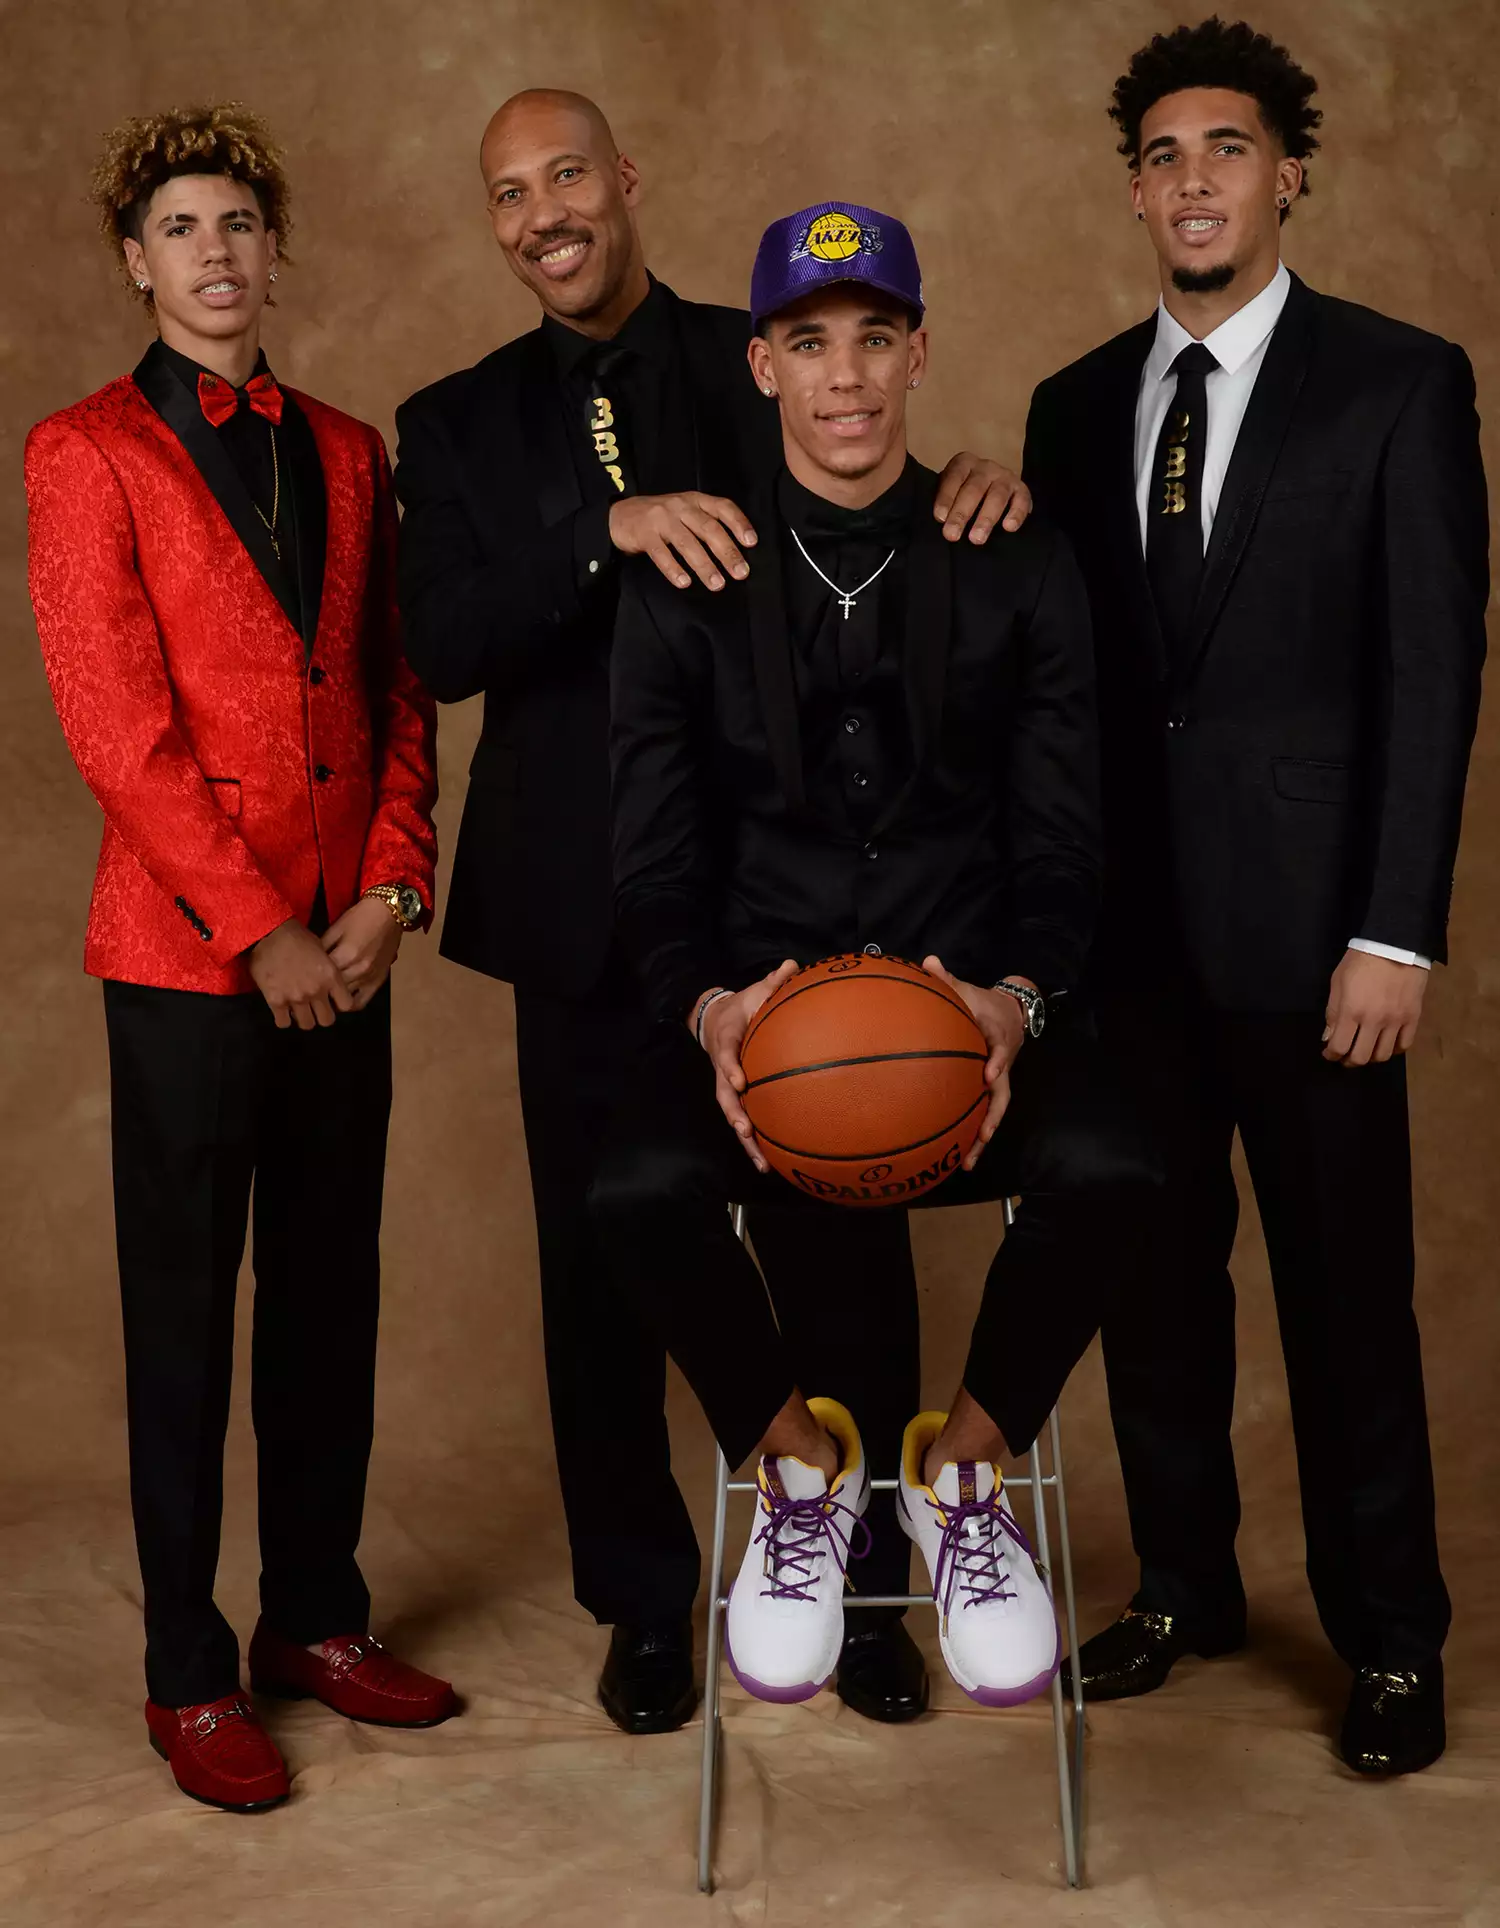 LaVar Ball, LaMelo Ball and LiAngelo Ball pose for a portrait with Lonzo Ball after being drafted number two overall to the Los Angeles Lakers during the 2017 NBA Draft on June 22, 2017.